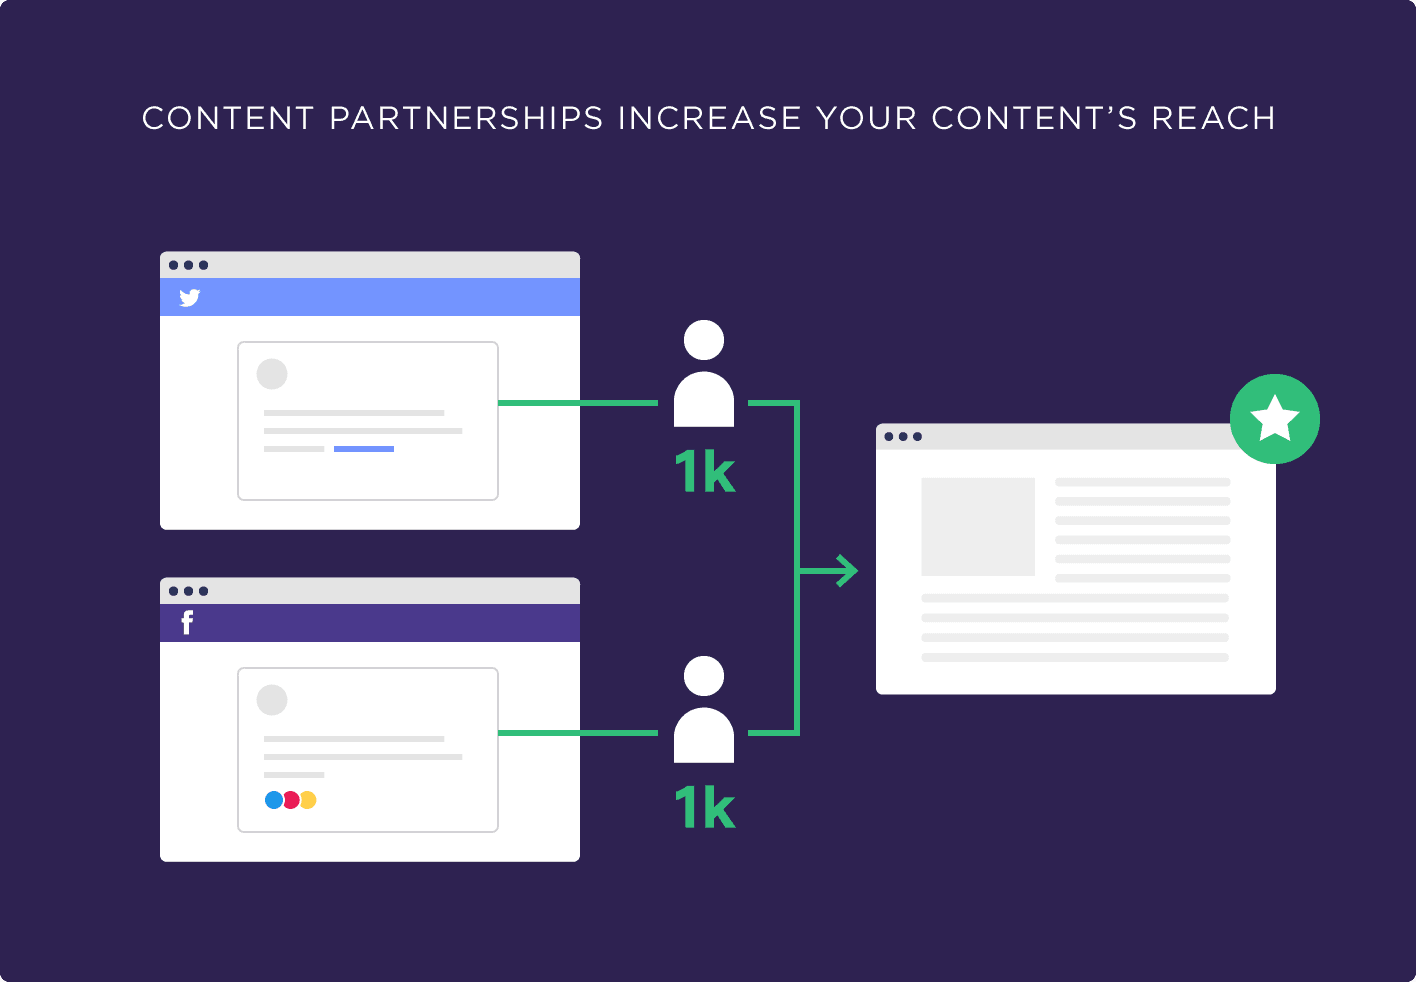 Content partnerships increase your content's reach